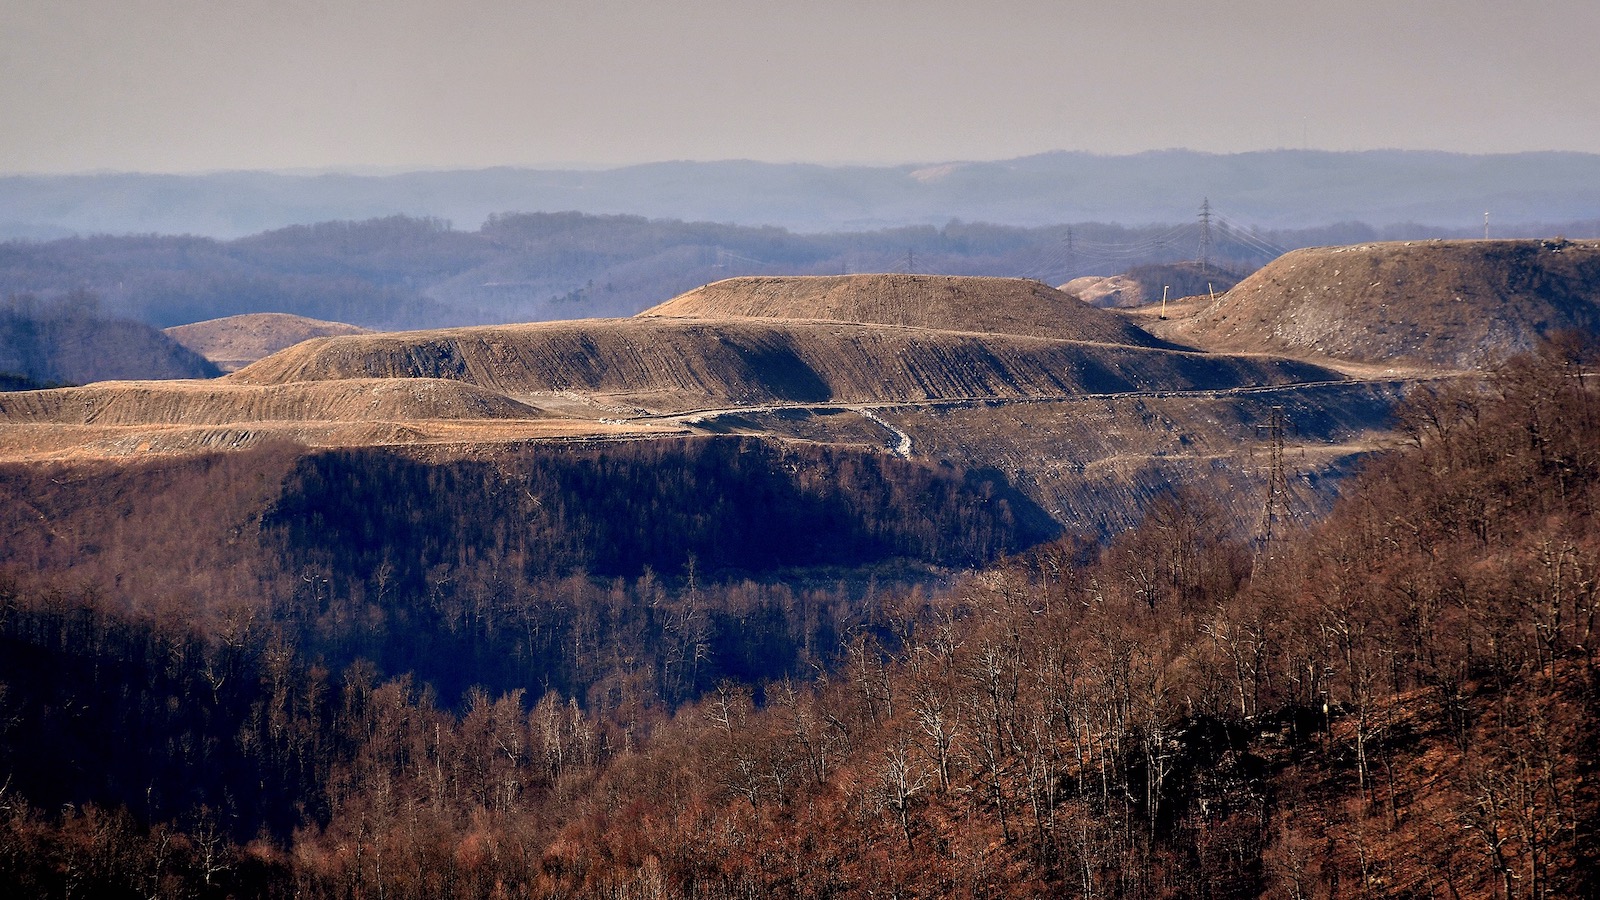 A panoramic shot shows a ridgeline in West Virginia leveled by mountaintop coal removal.